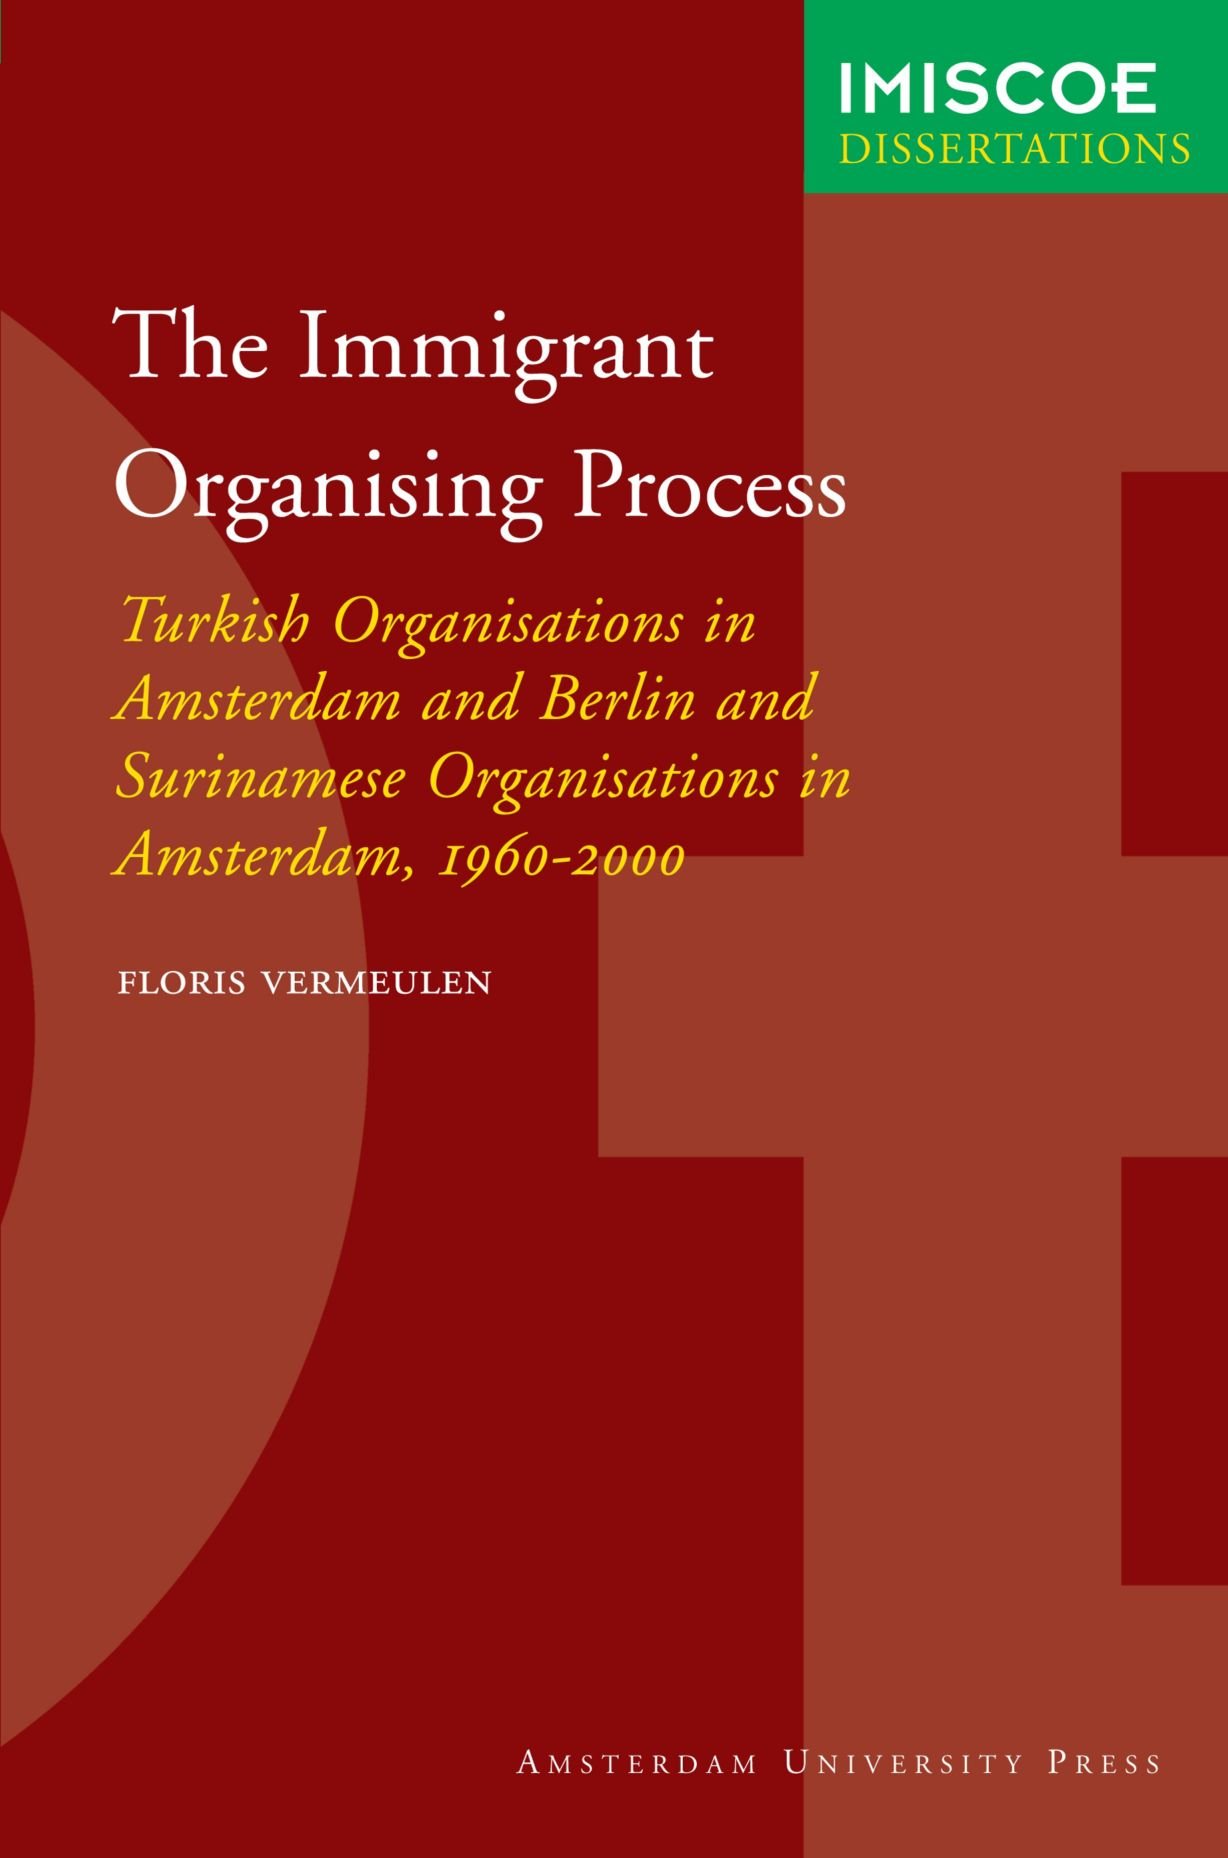 The immigrant organising process: Turkish organisations in Amsterdam and Berlin and Surinamese organisations in Amsterdam, 1960-2000